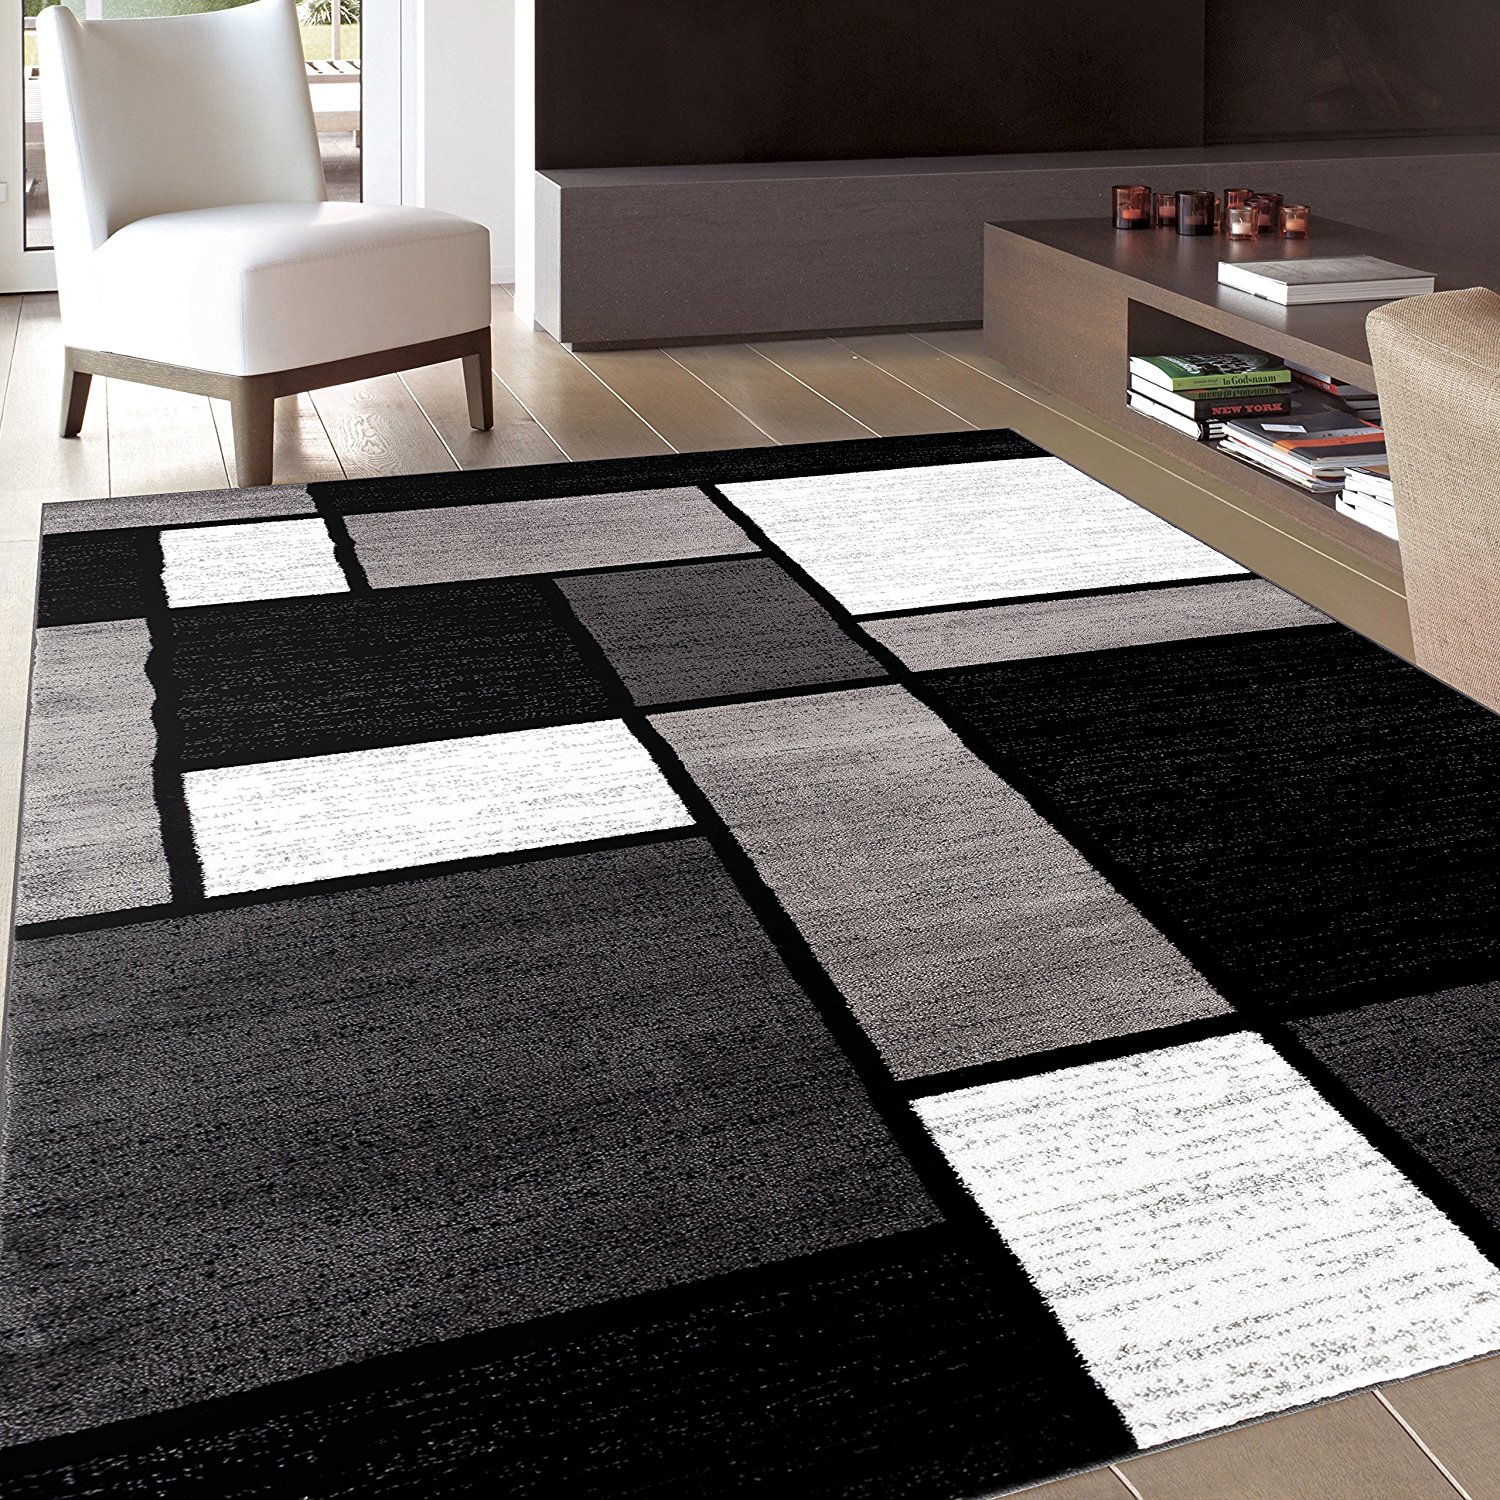 best rugs black and white area rugs amazon.com: rug decor contemporary modern boxes  area JHUTXKK